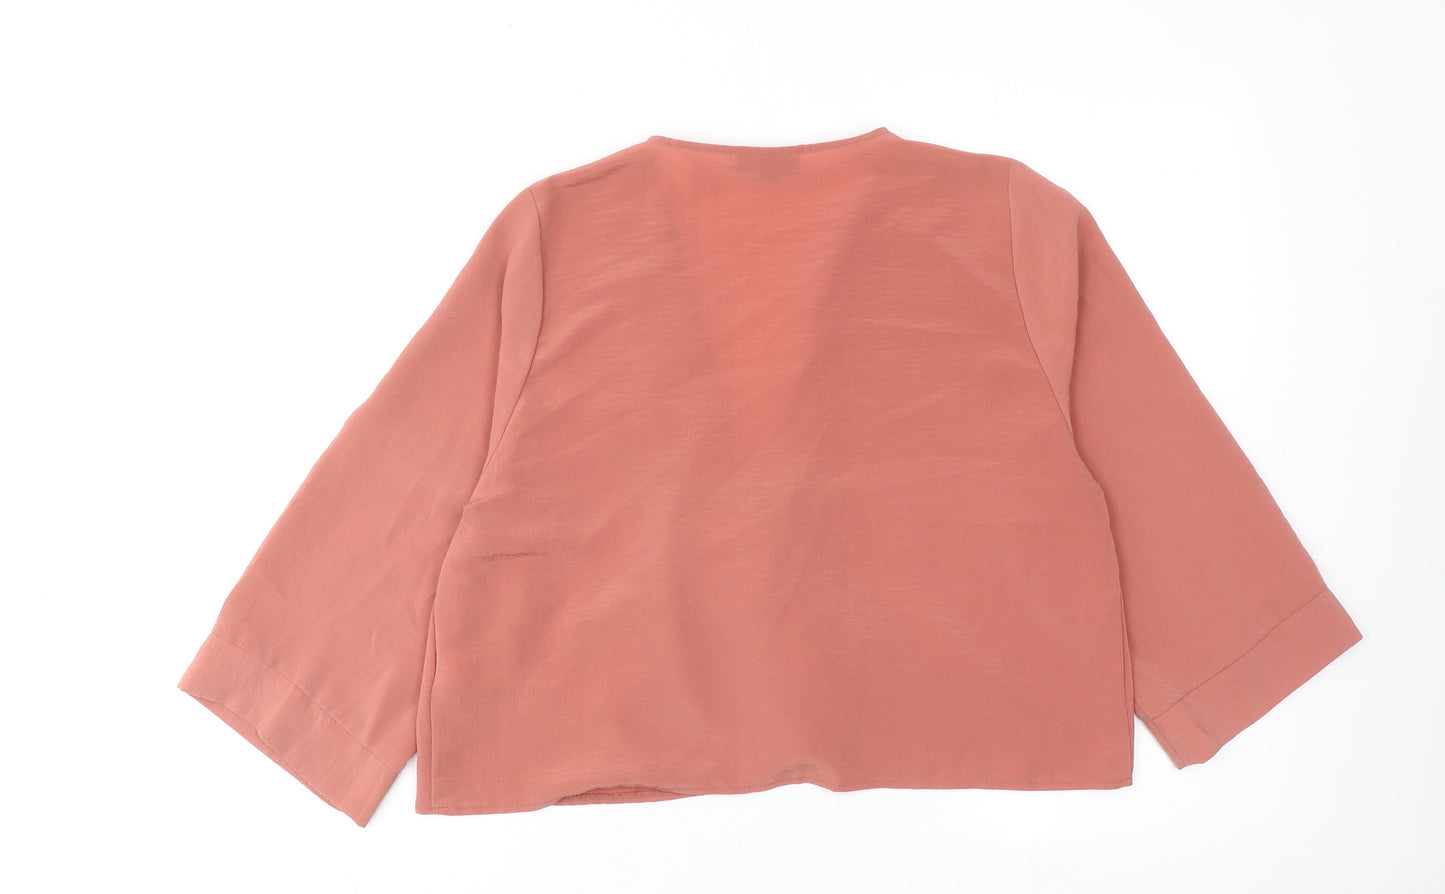 Topshop Womens Pink Polyester Basic Blouse Size 8 V-Neck - Tie Front